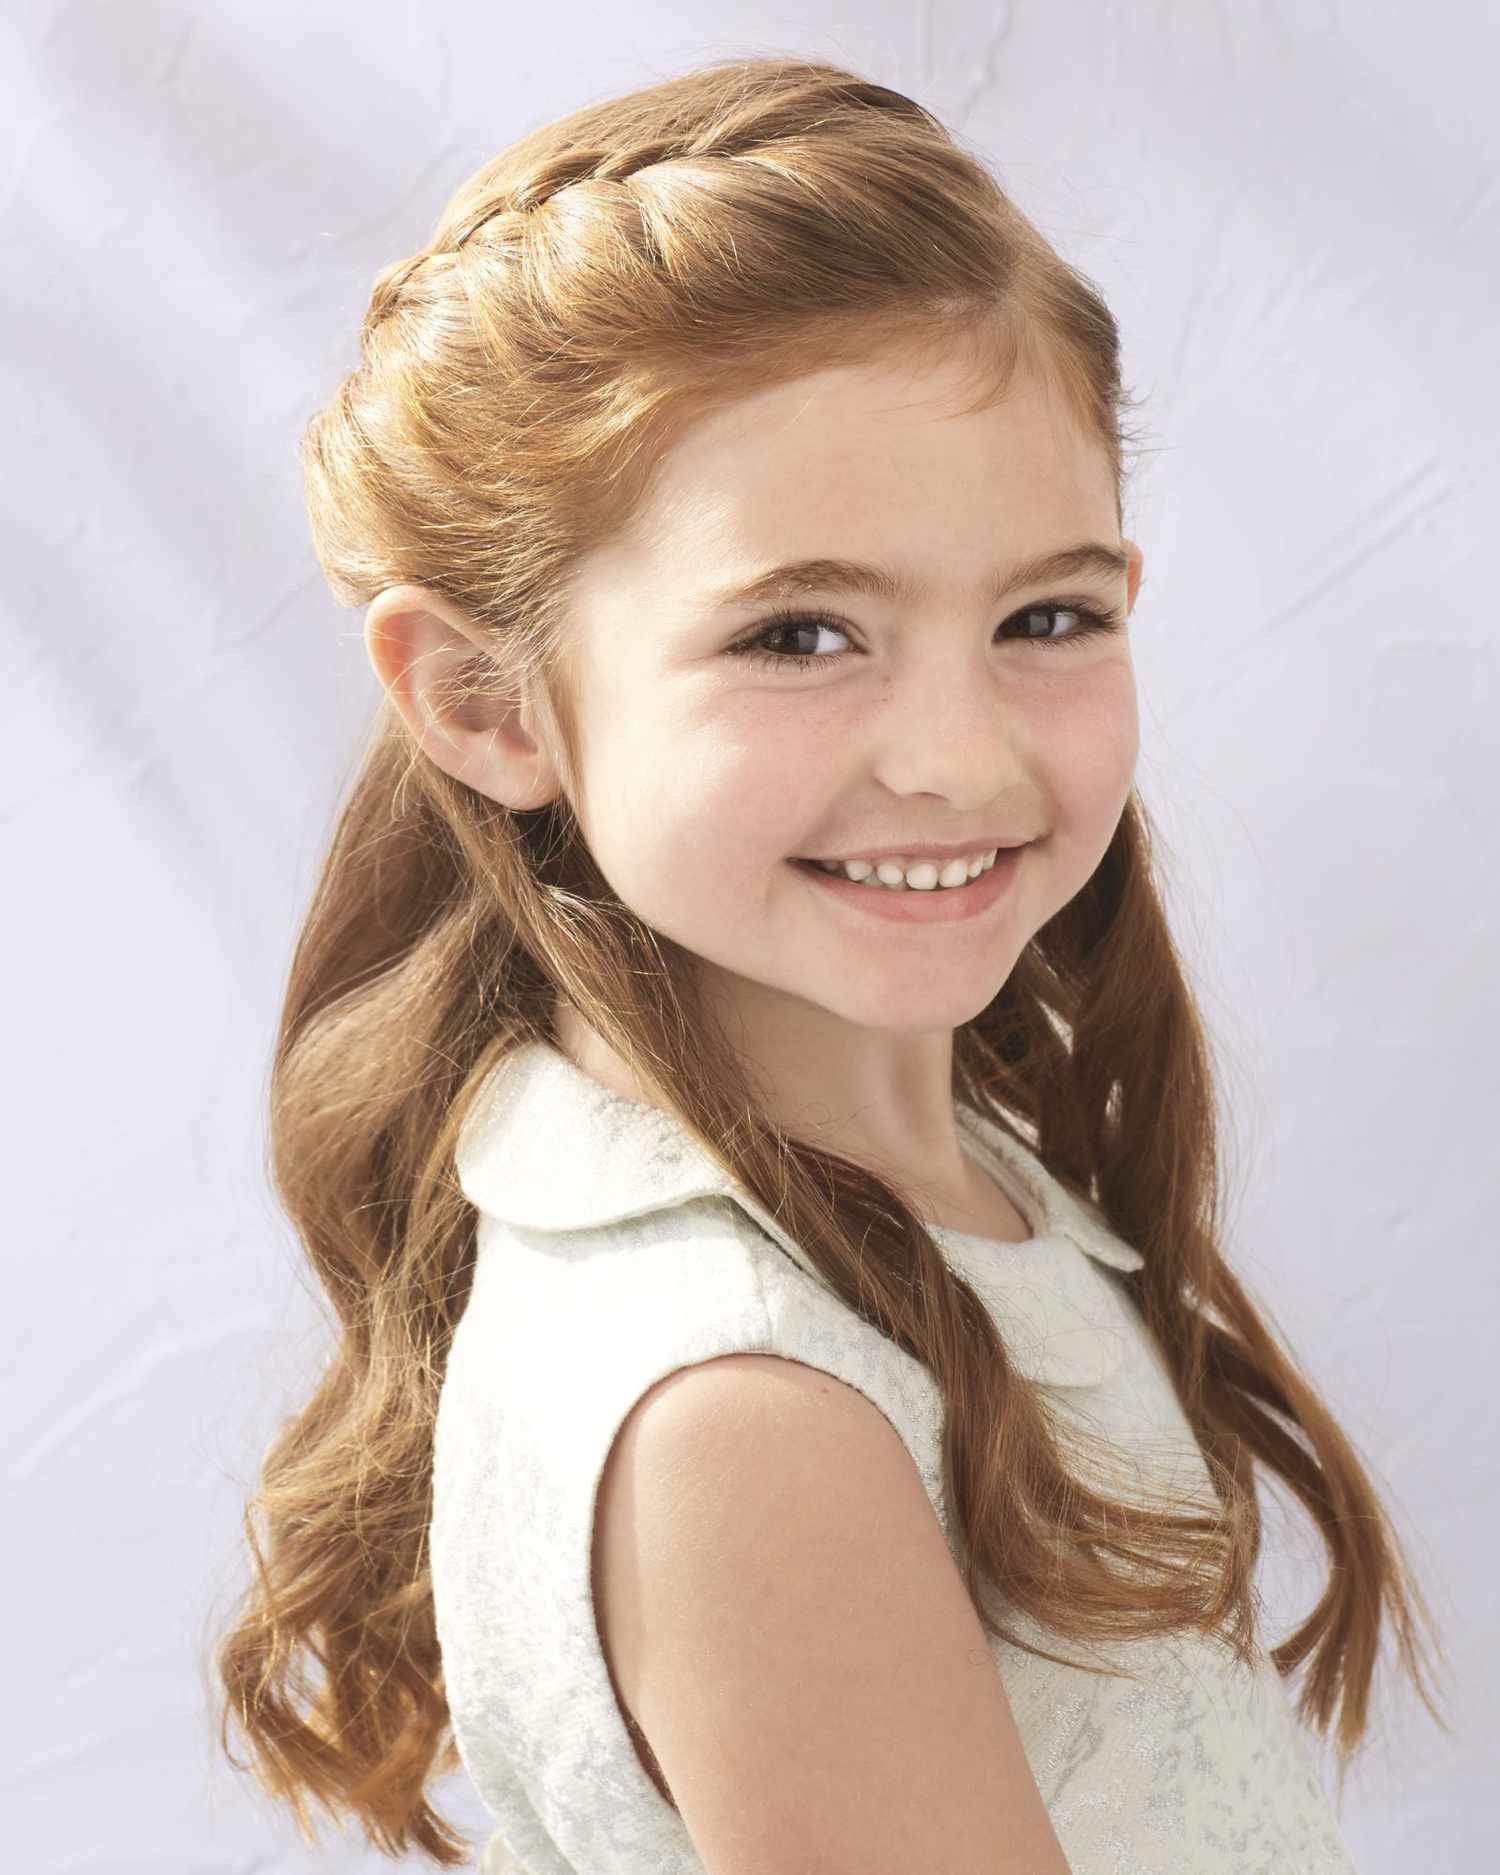 Flower Girl Hairstyles That Are Cute and Comfy Martha Stewart.